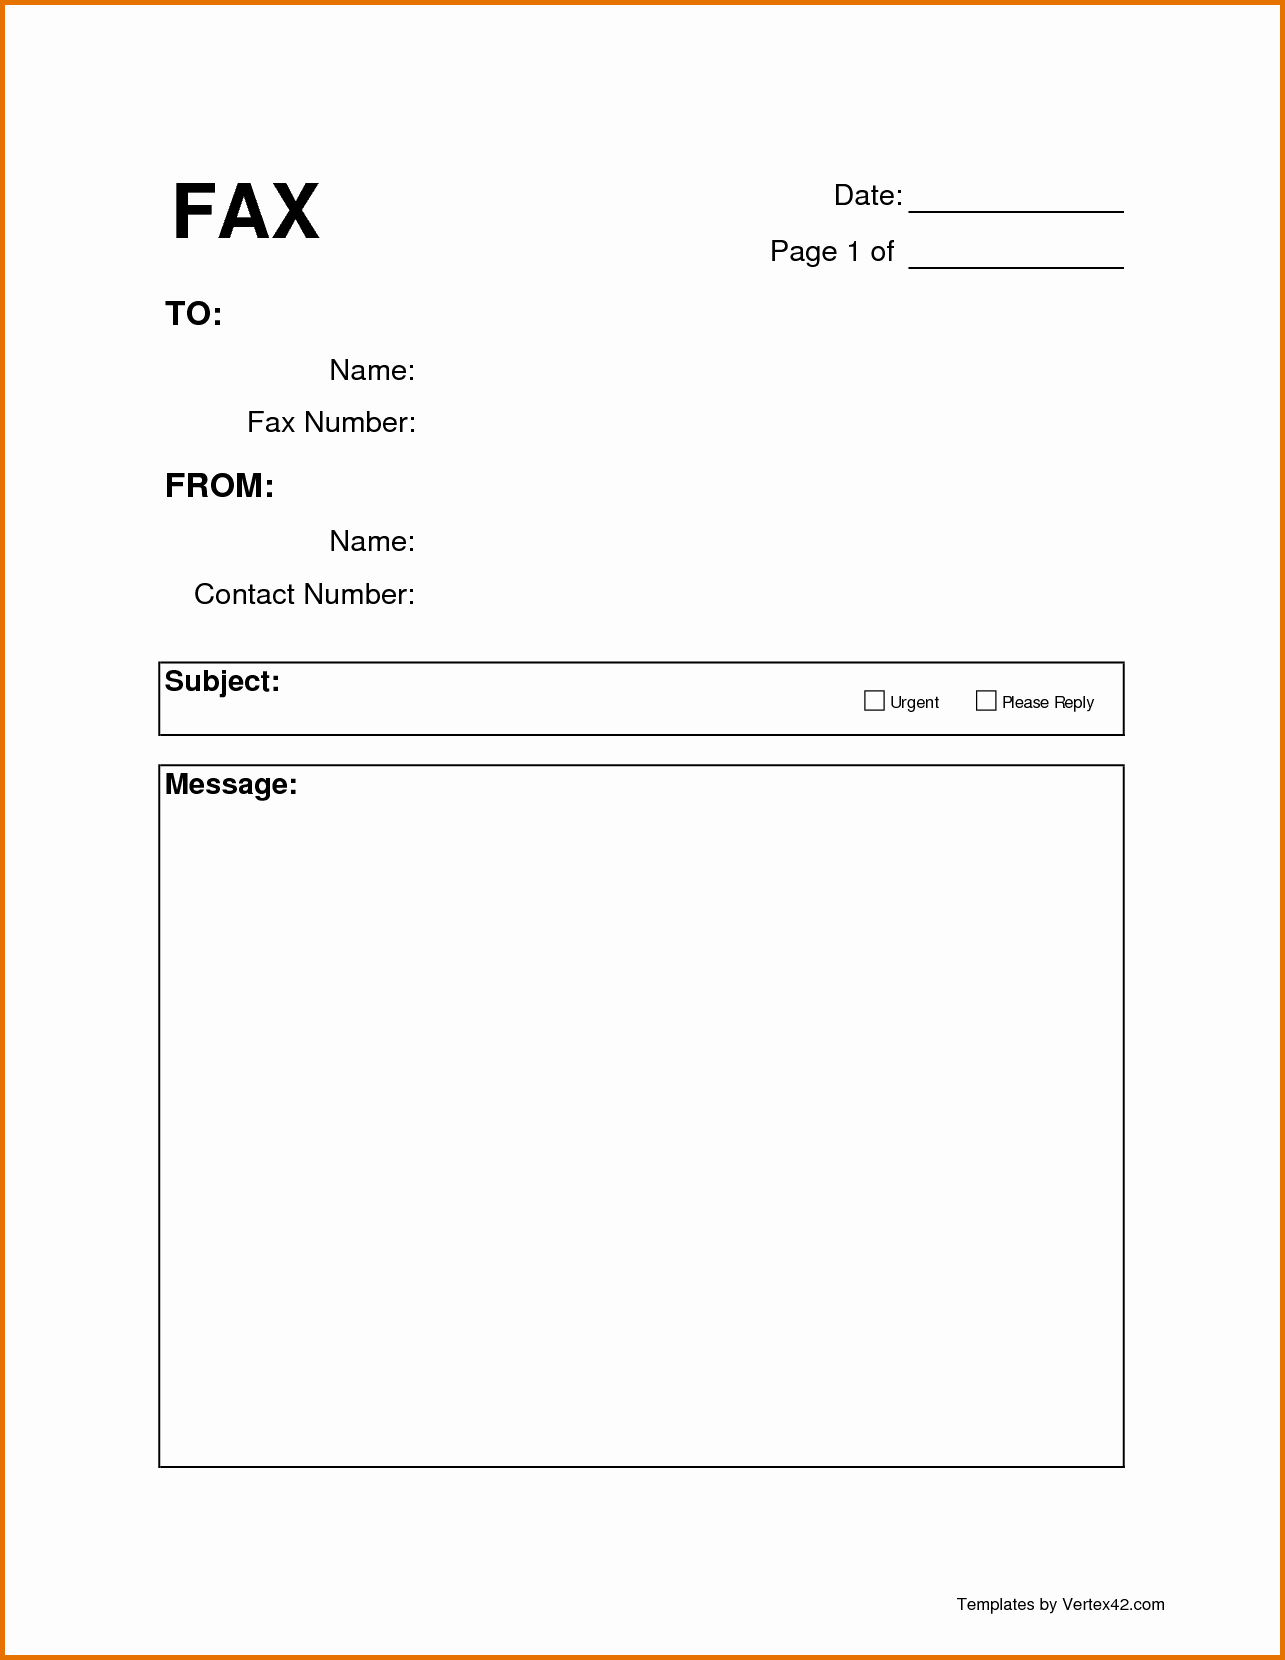 Printable Cover Sheet for Fax Unique 4 Printable Fax Cover Sheetsreference Letters Words